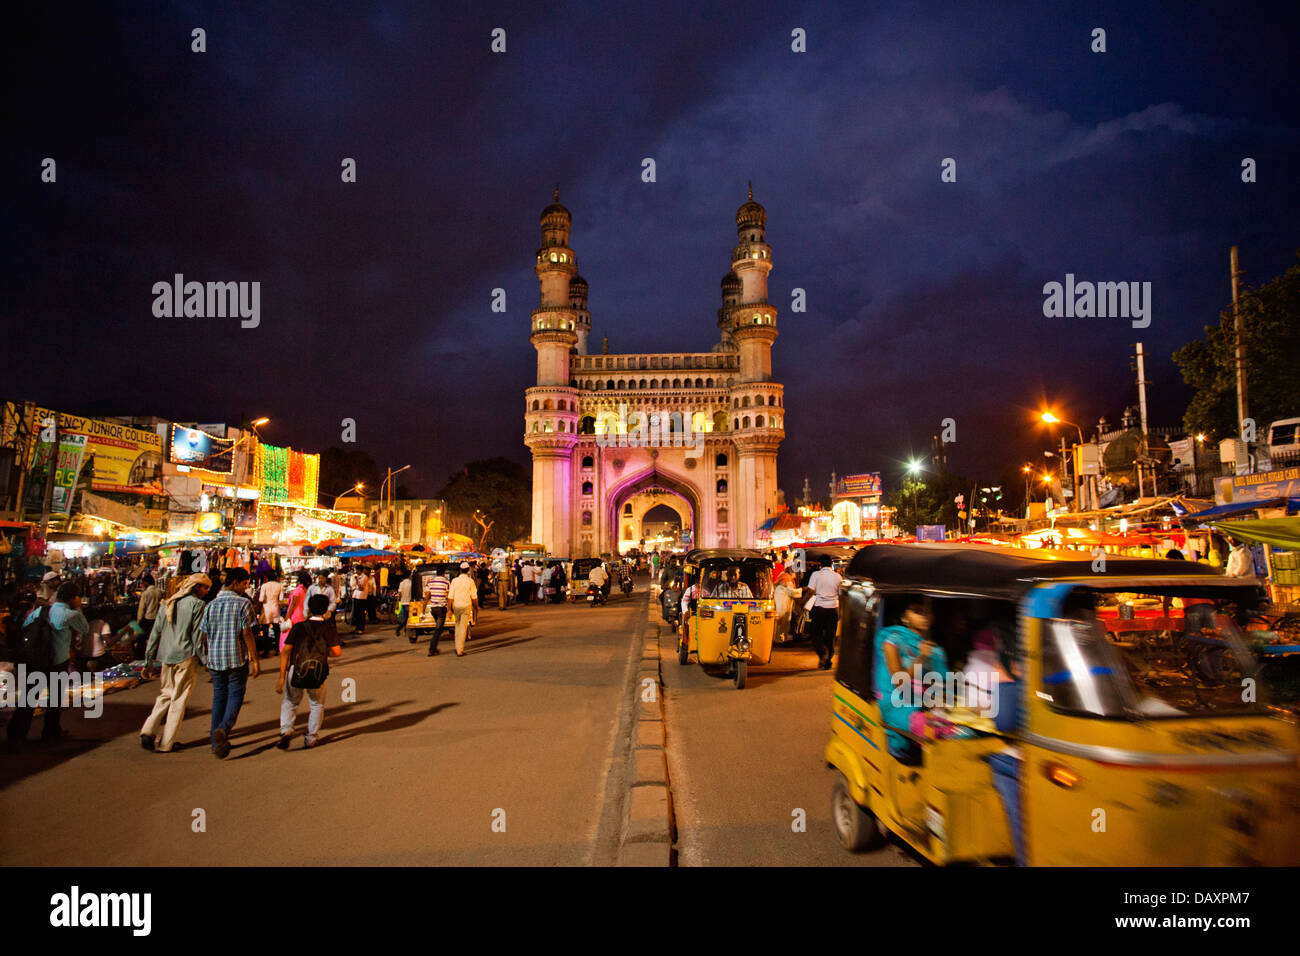 Traffic on the road with Mosque in the background, Charminar Bazaar, Hyderabad, Andhra Pradesh, India Stock Photo